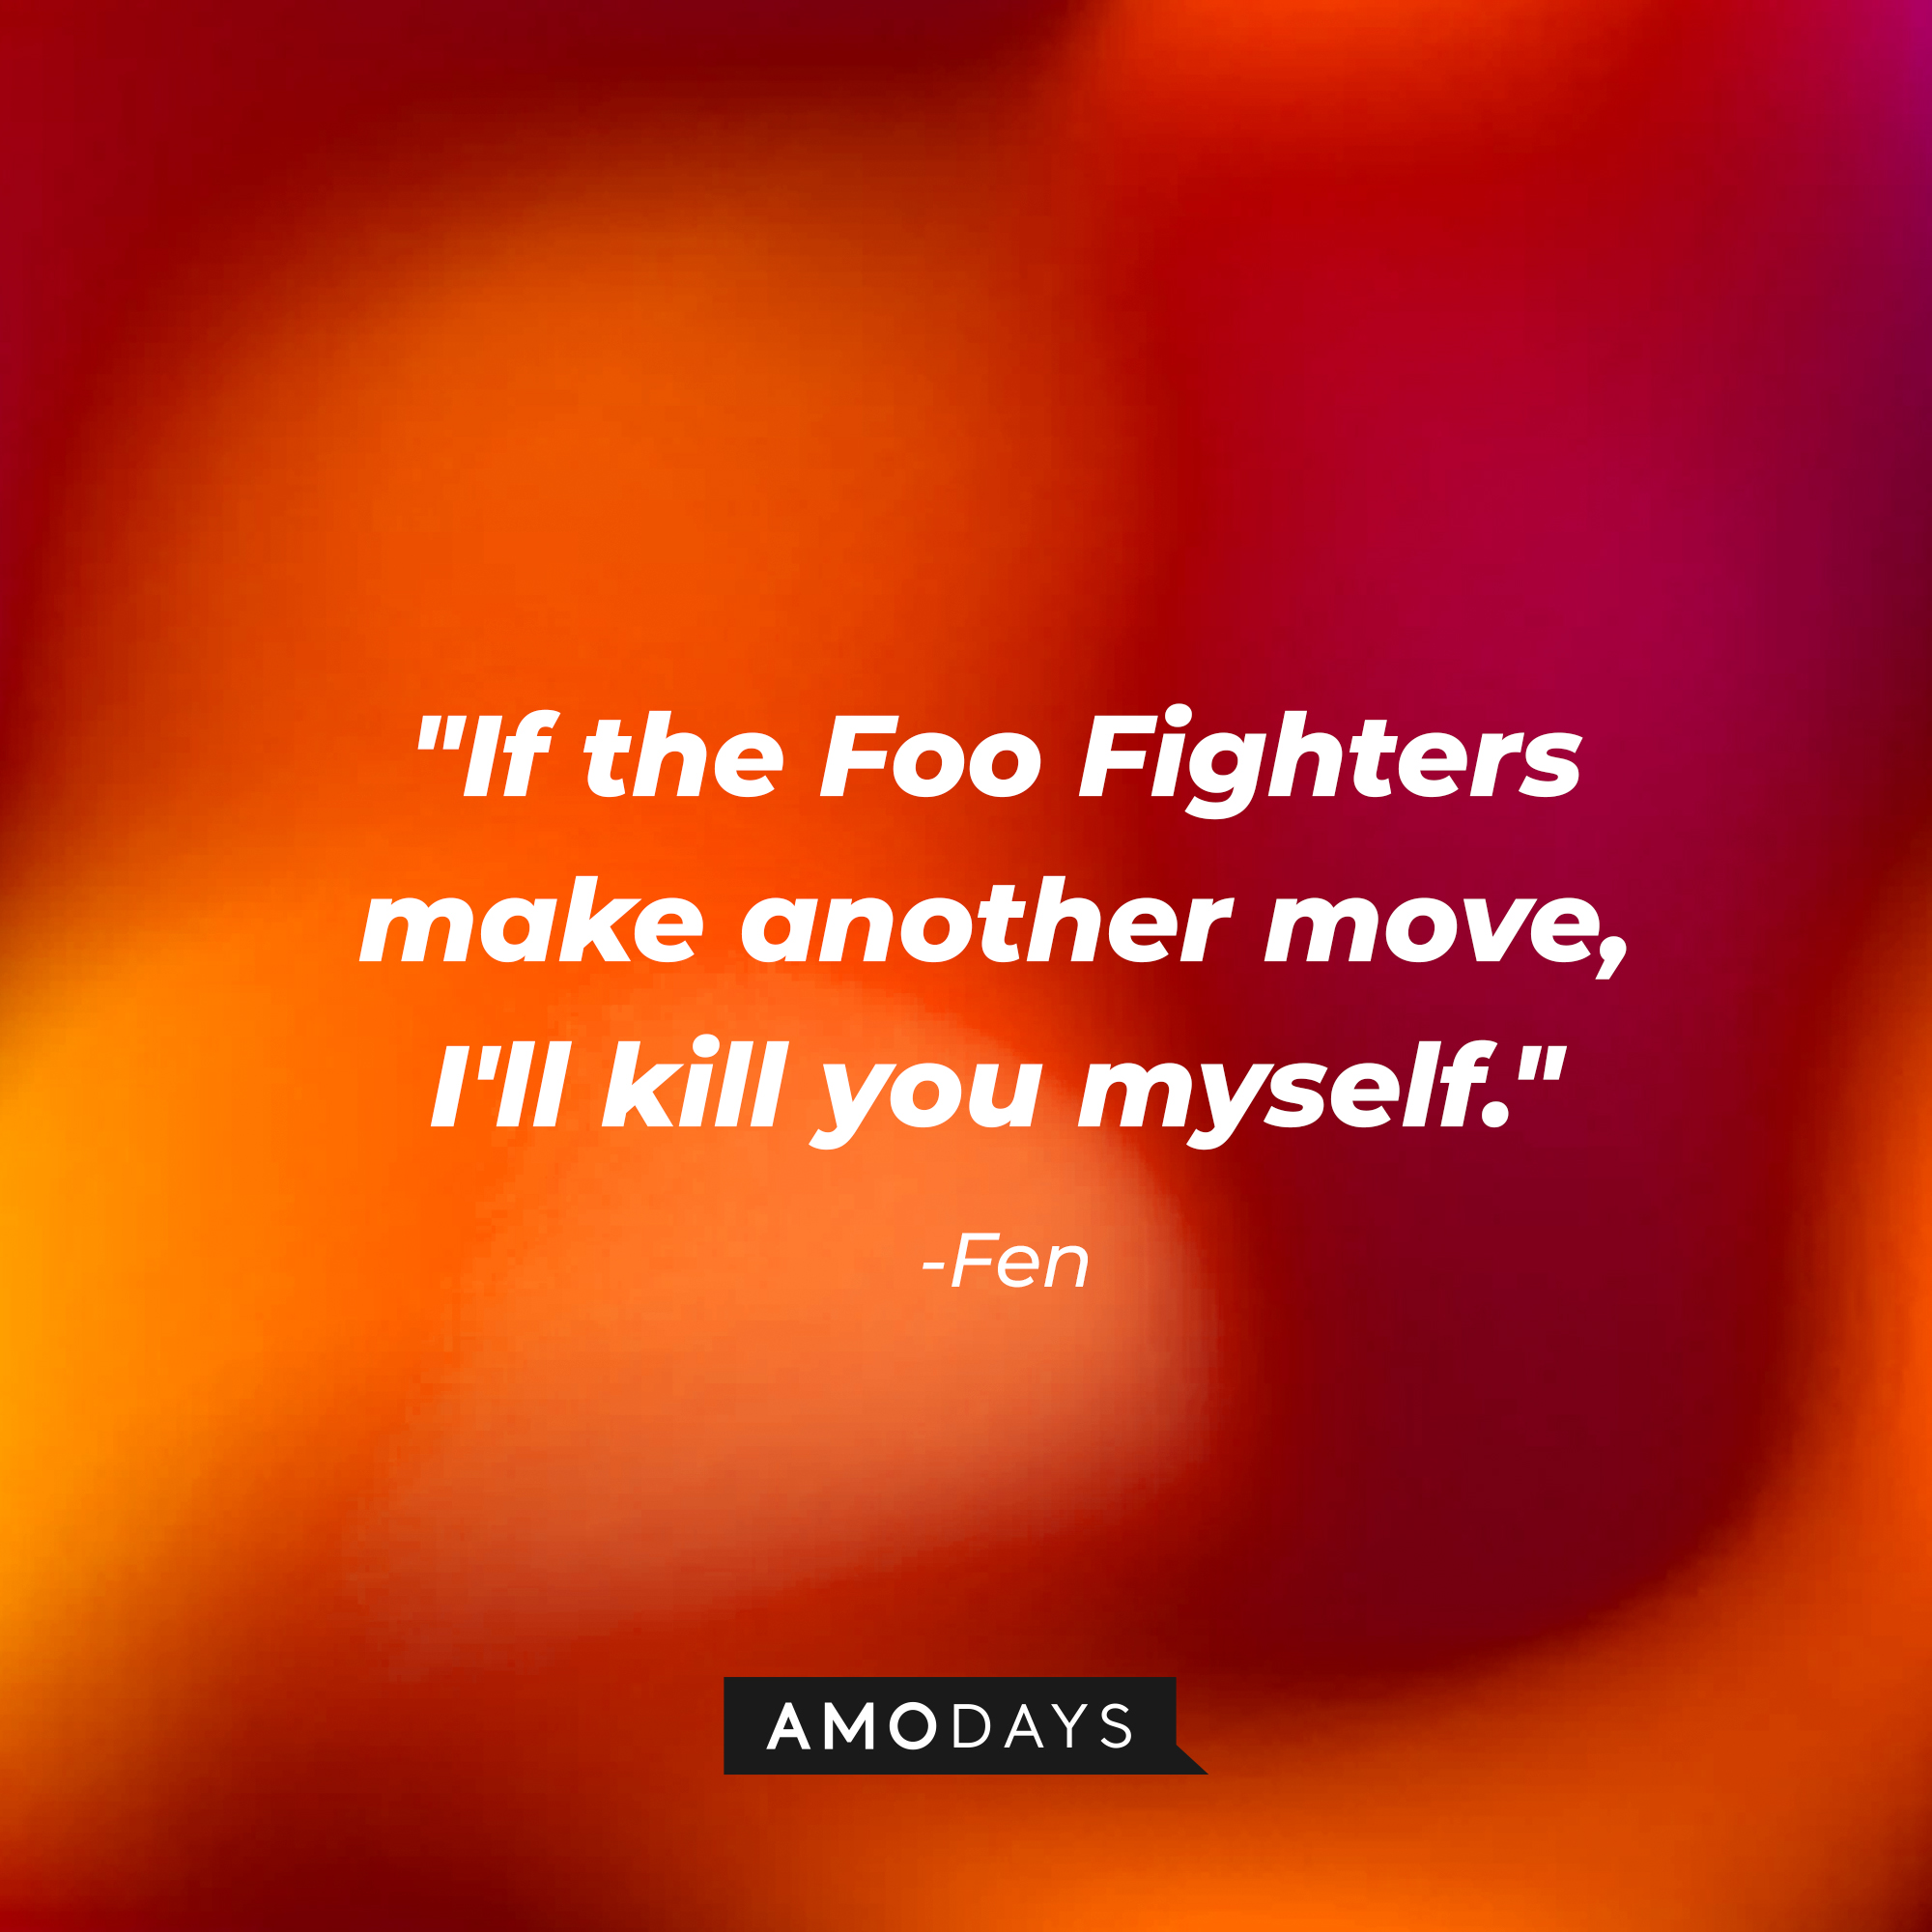 Fen’s quotes: "If the Foo Fighters make another move, I'll kill you myself." | Source: AmoDays